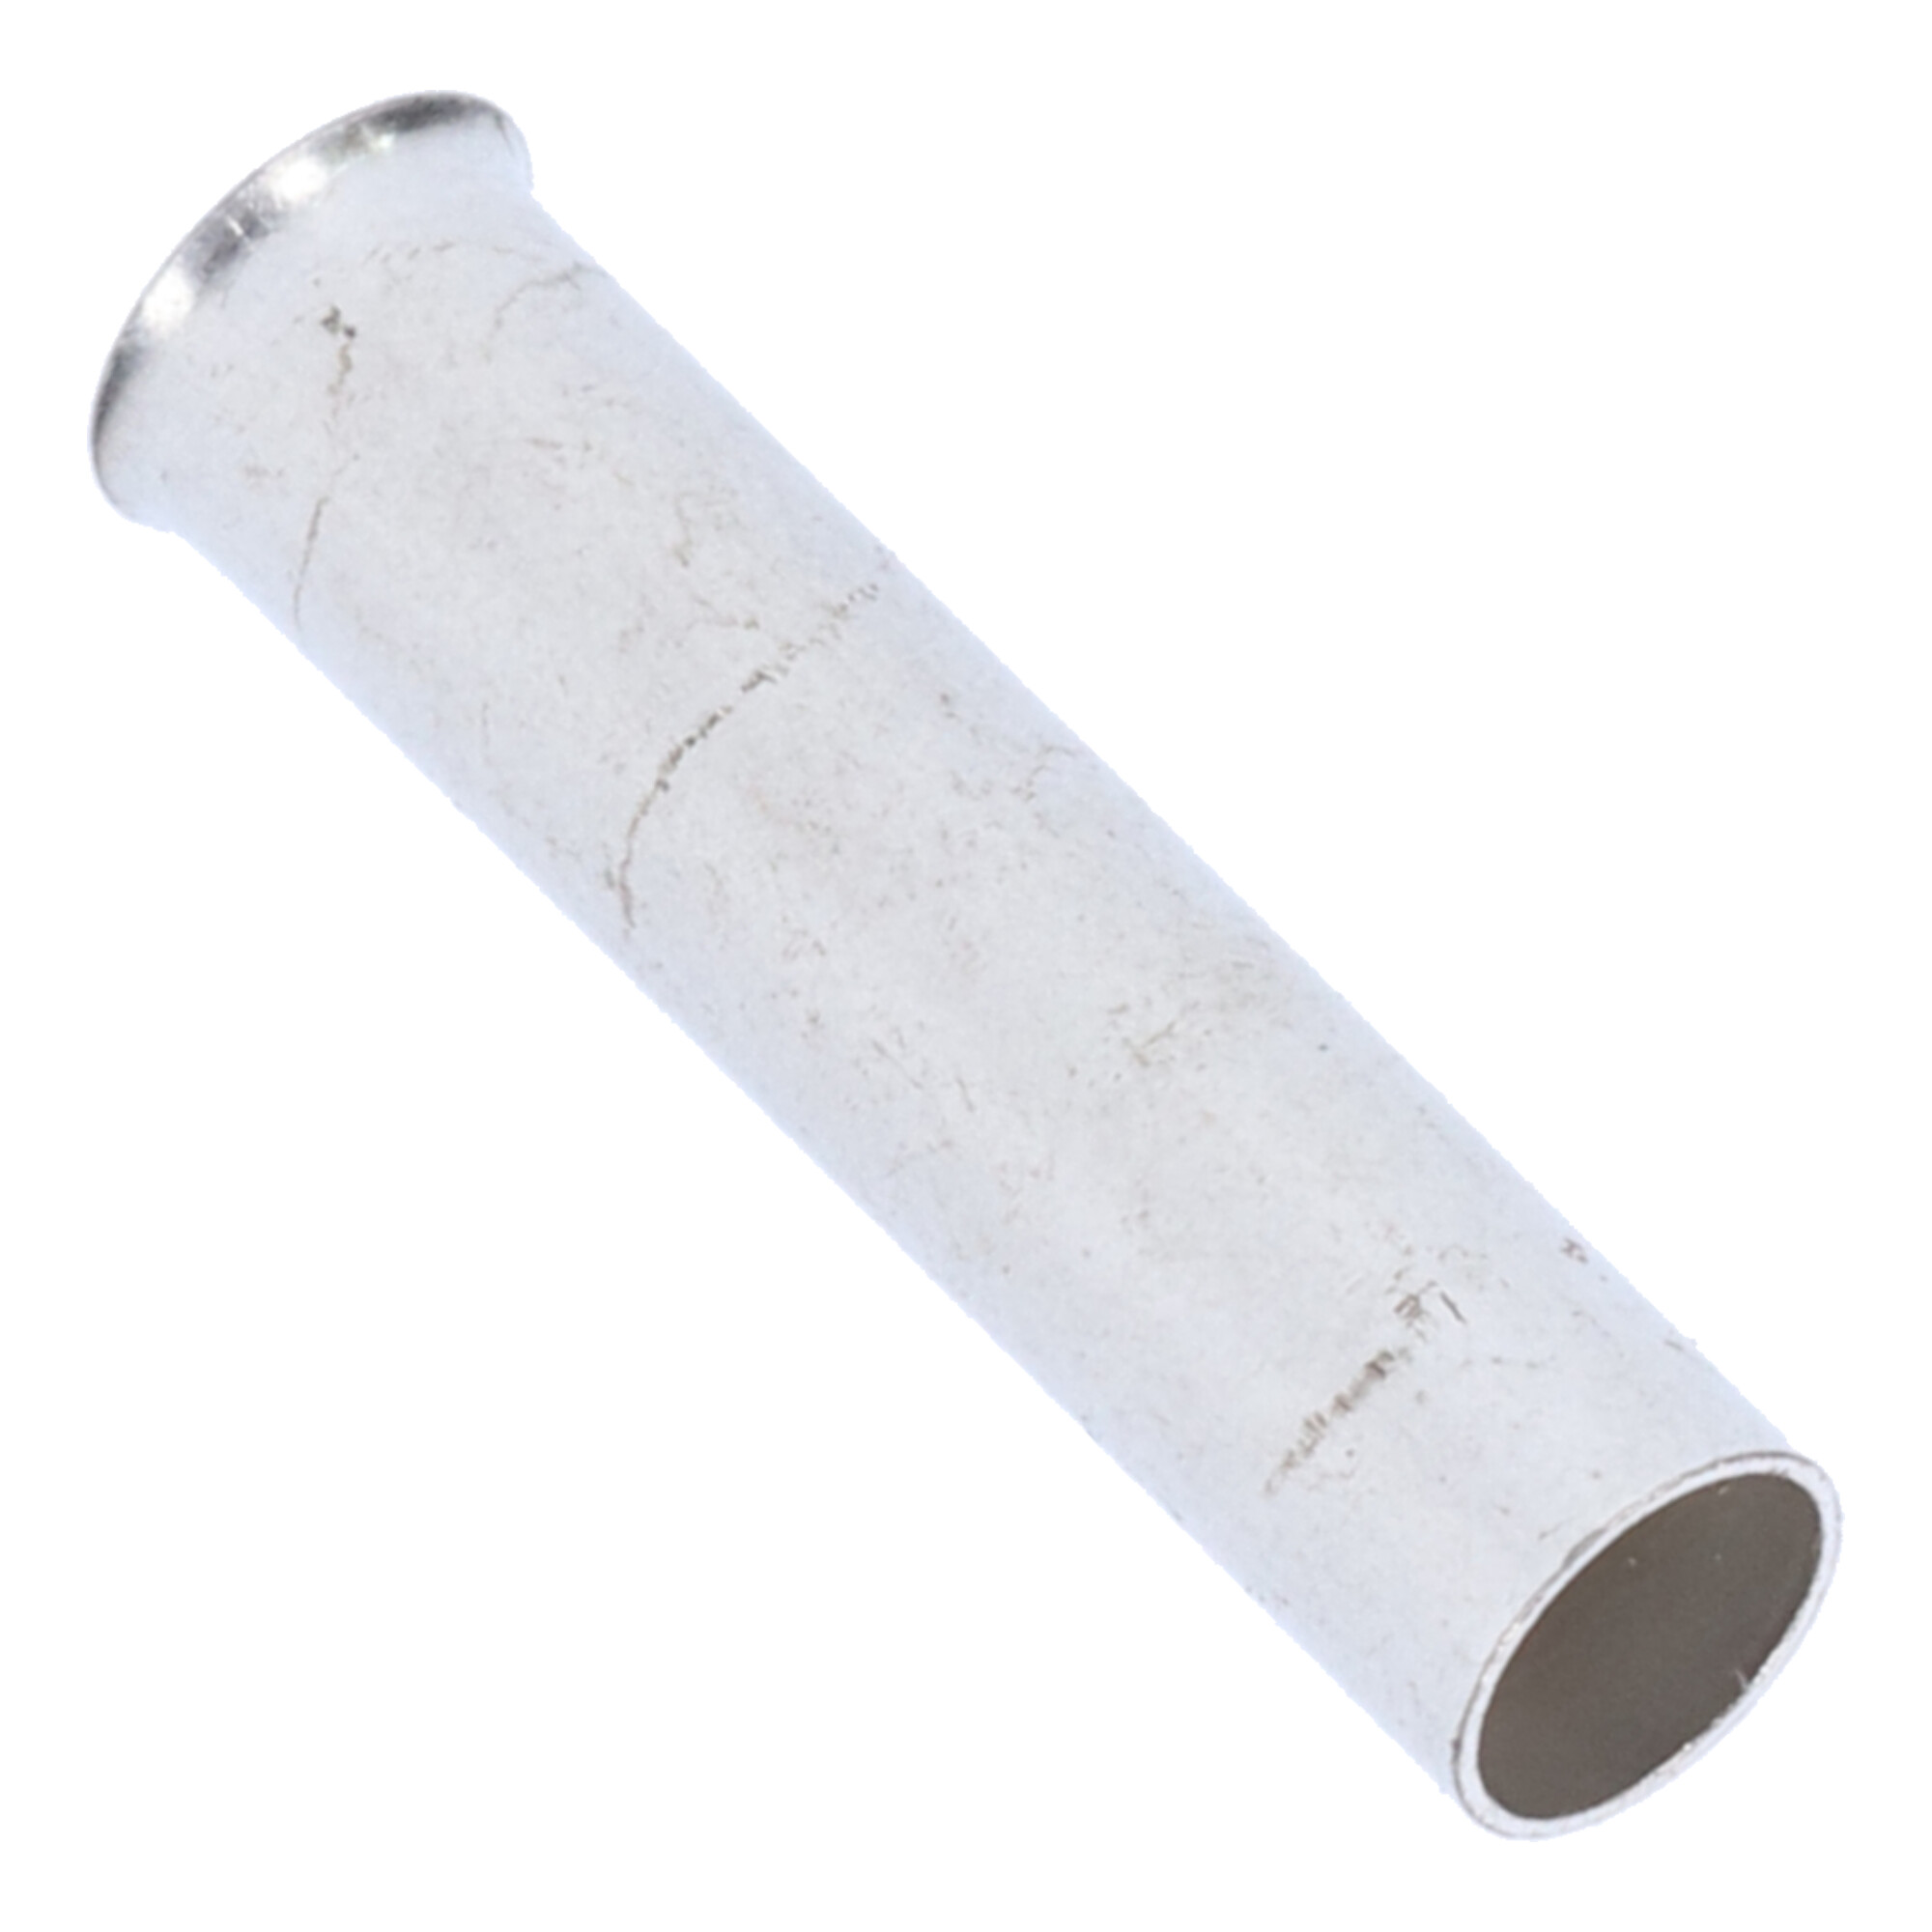 15-B06010 Uninsulated wire end sleeve